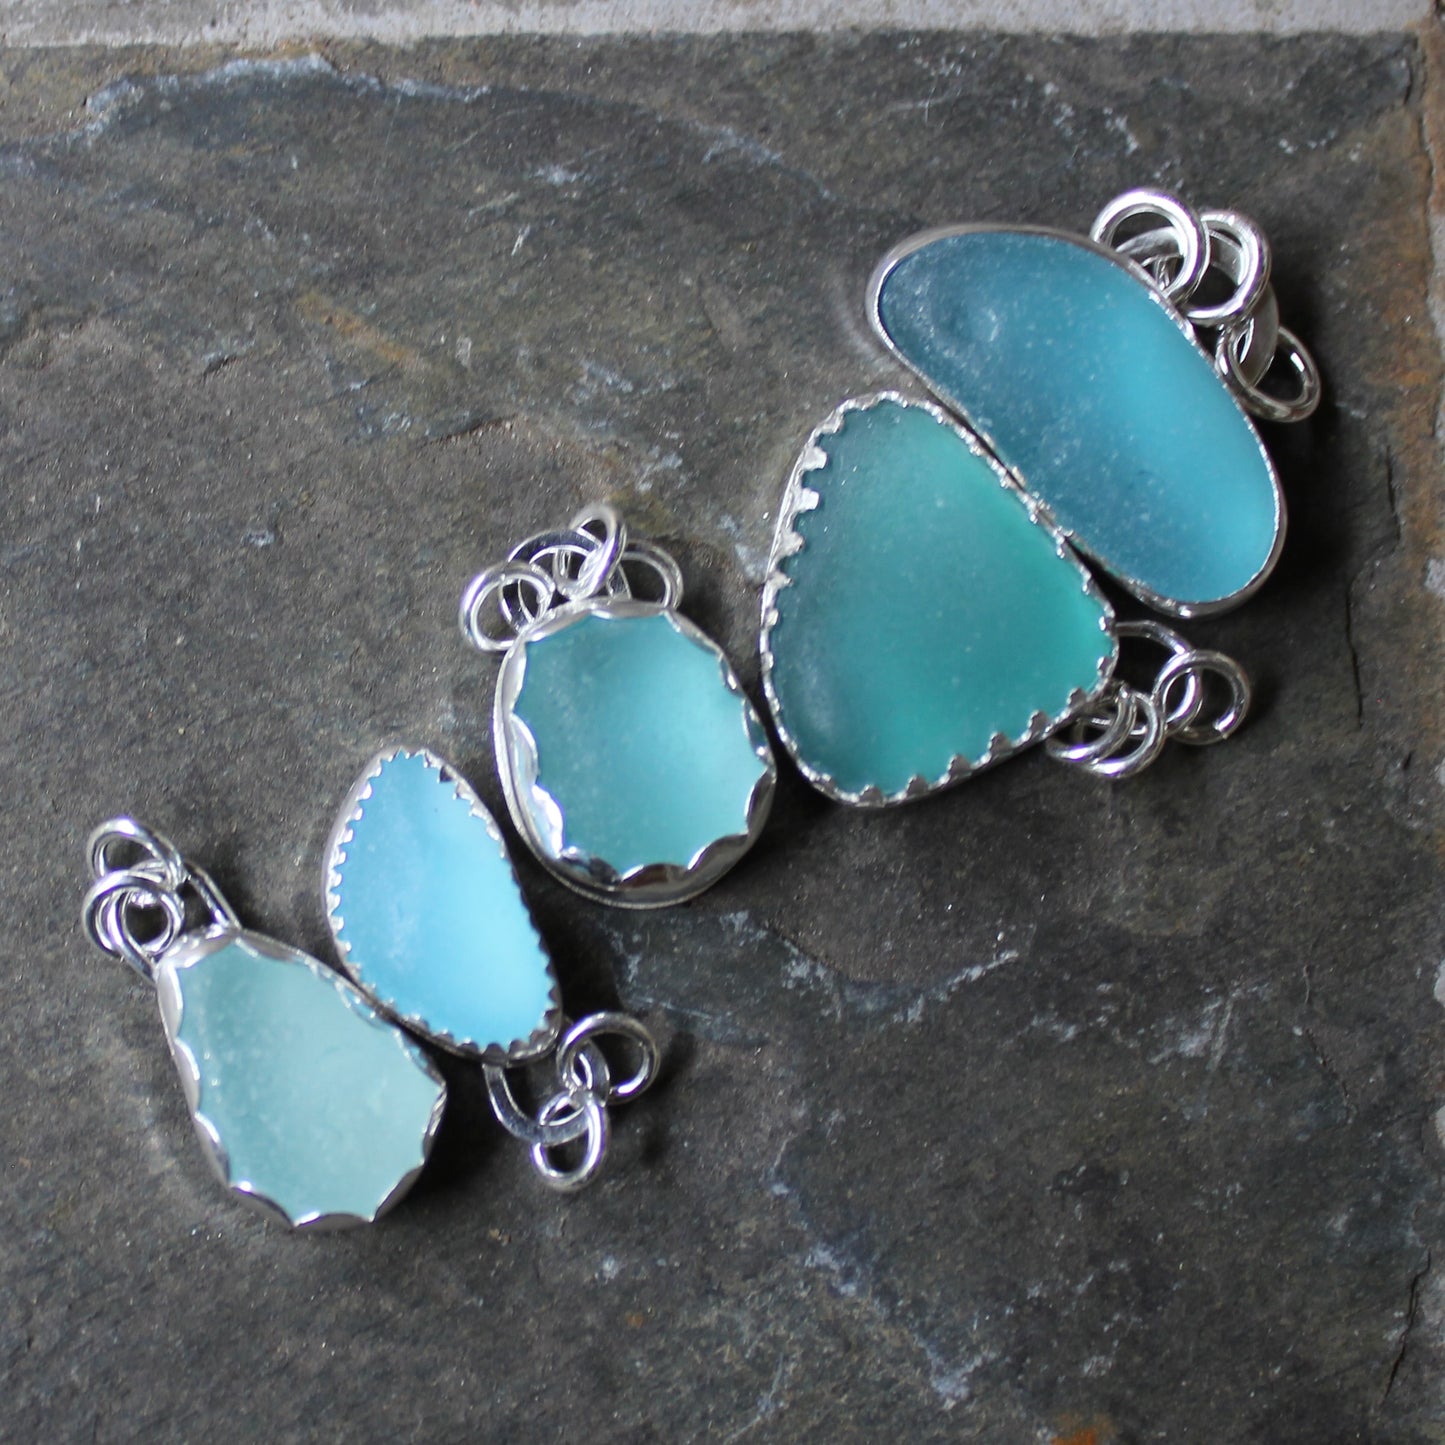 Five handmade aqua blue and turquoise sea glass pendants in sterling silver